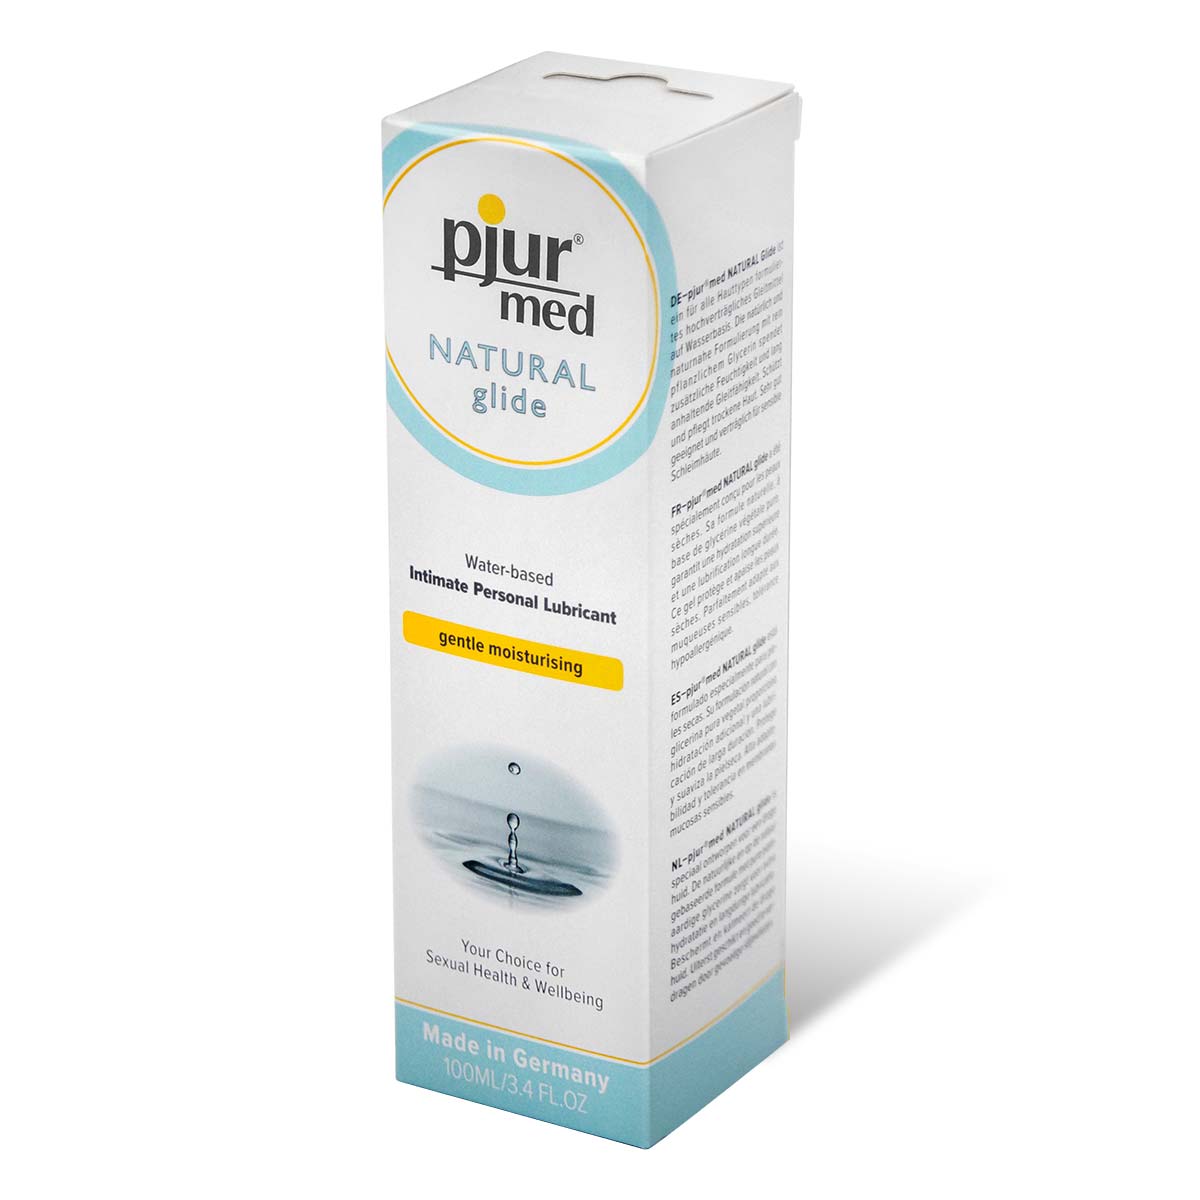 pjur med NATURAL glide 100ml Water-based Lubricant-thumb_1